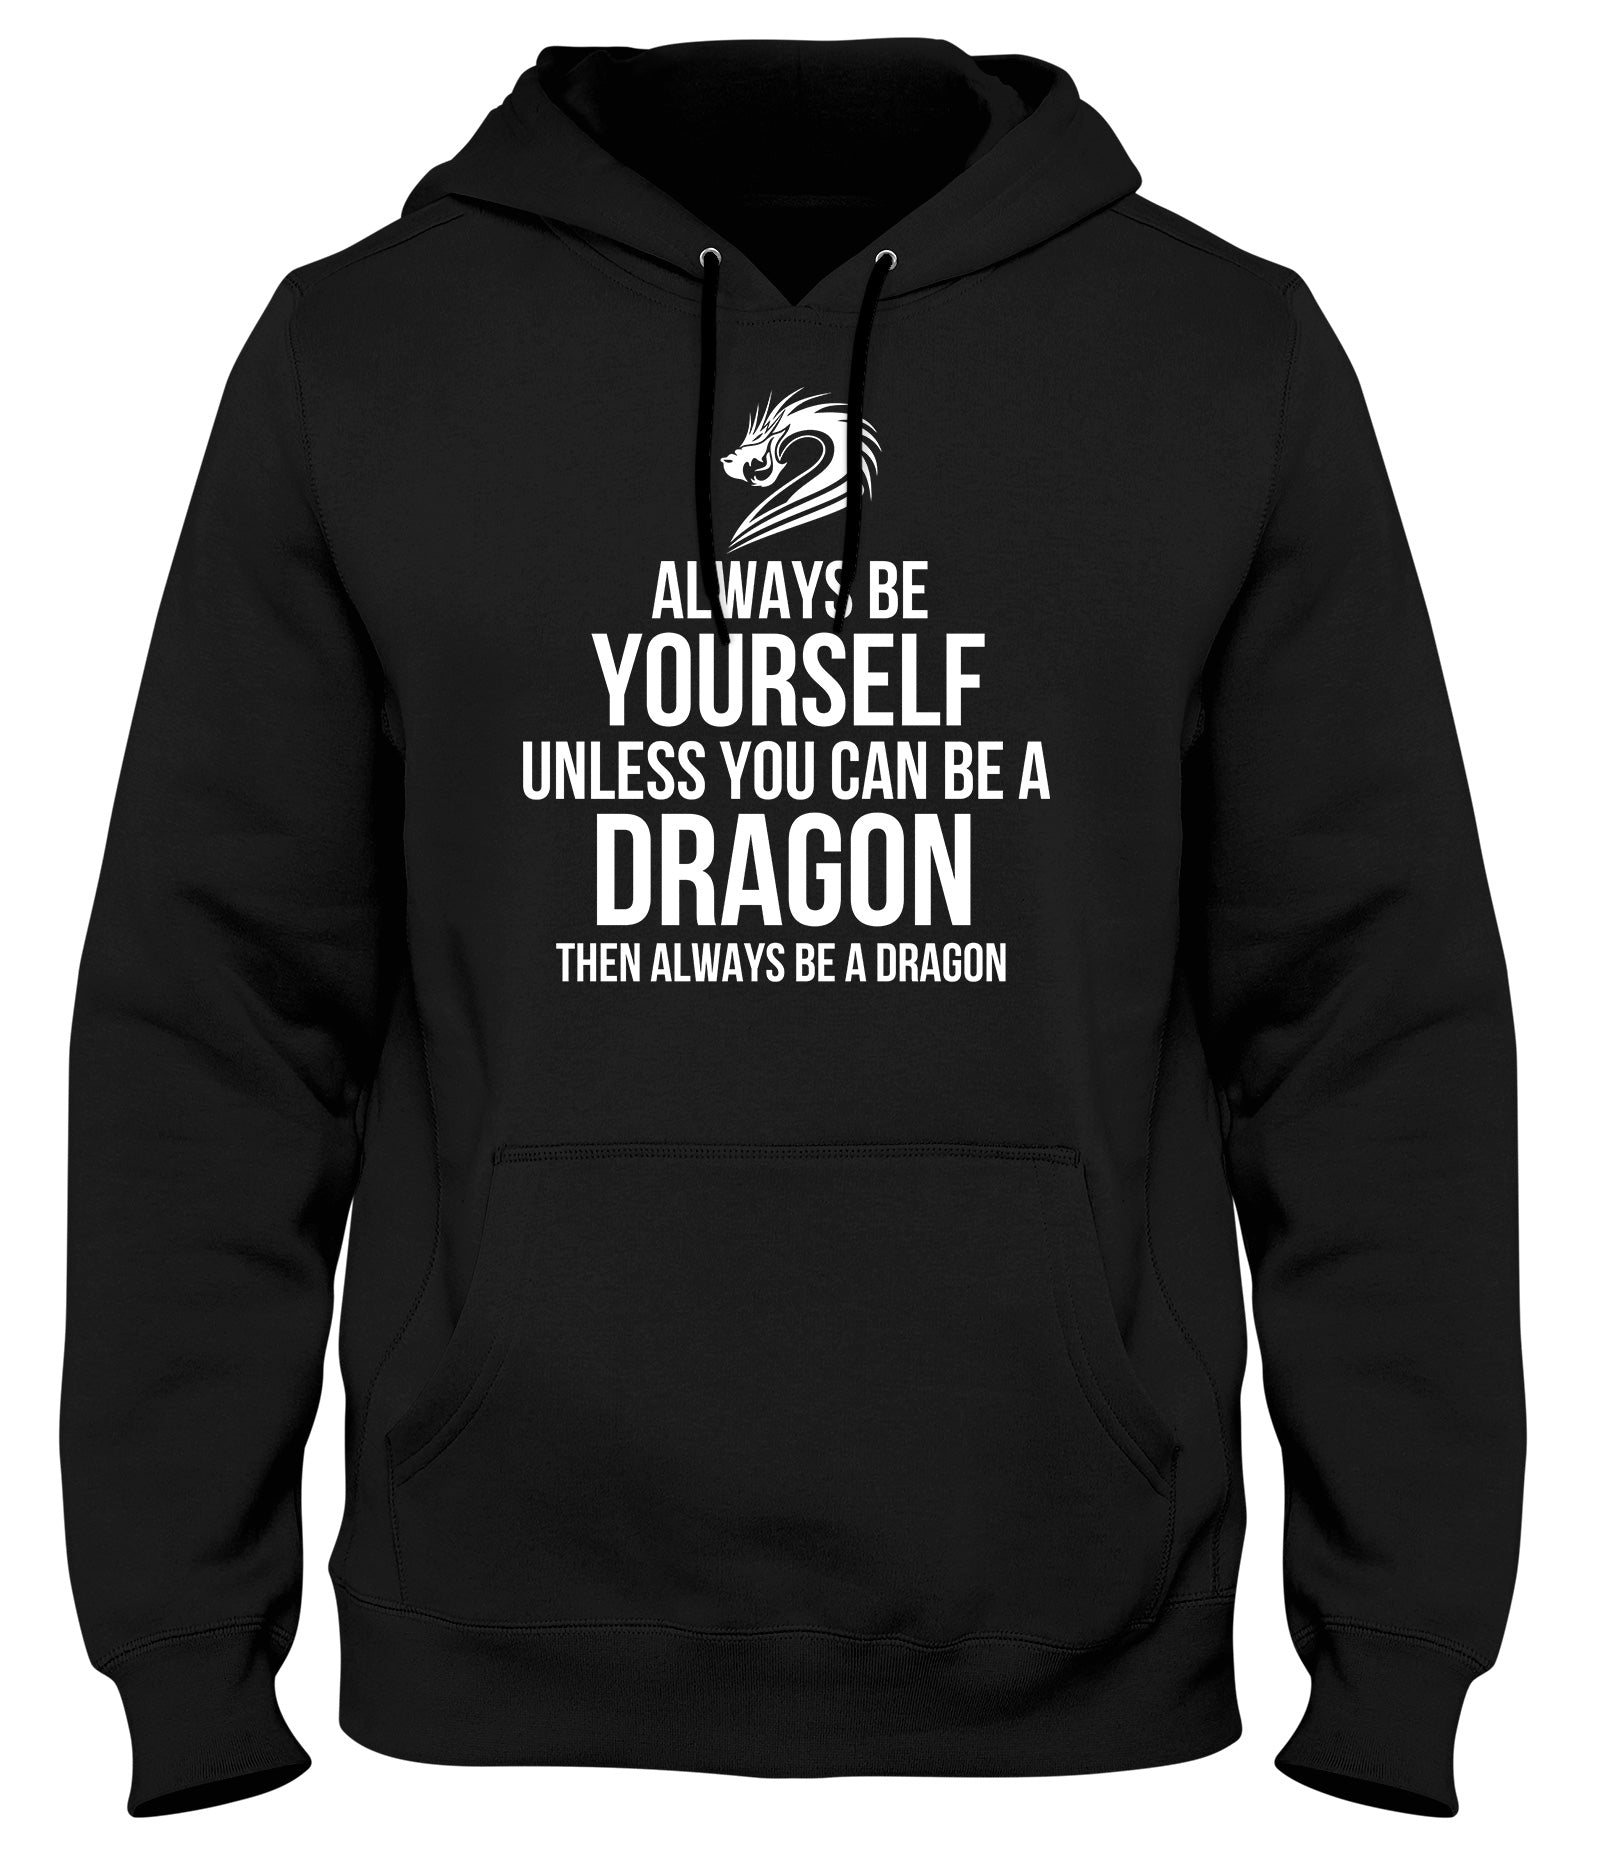 ALWAYS BE YOURSELF UNLESS YOU CAN BE A DRAGON THEN ALWAYS BE A DAGON MENS WOMENS LADIES UNISEX FUNNY SLOGAN HOODIE